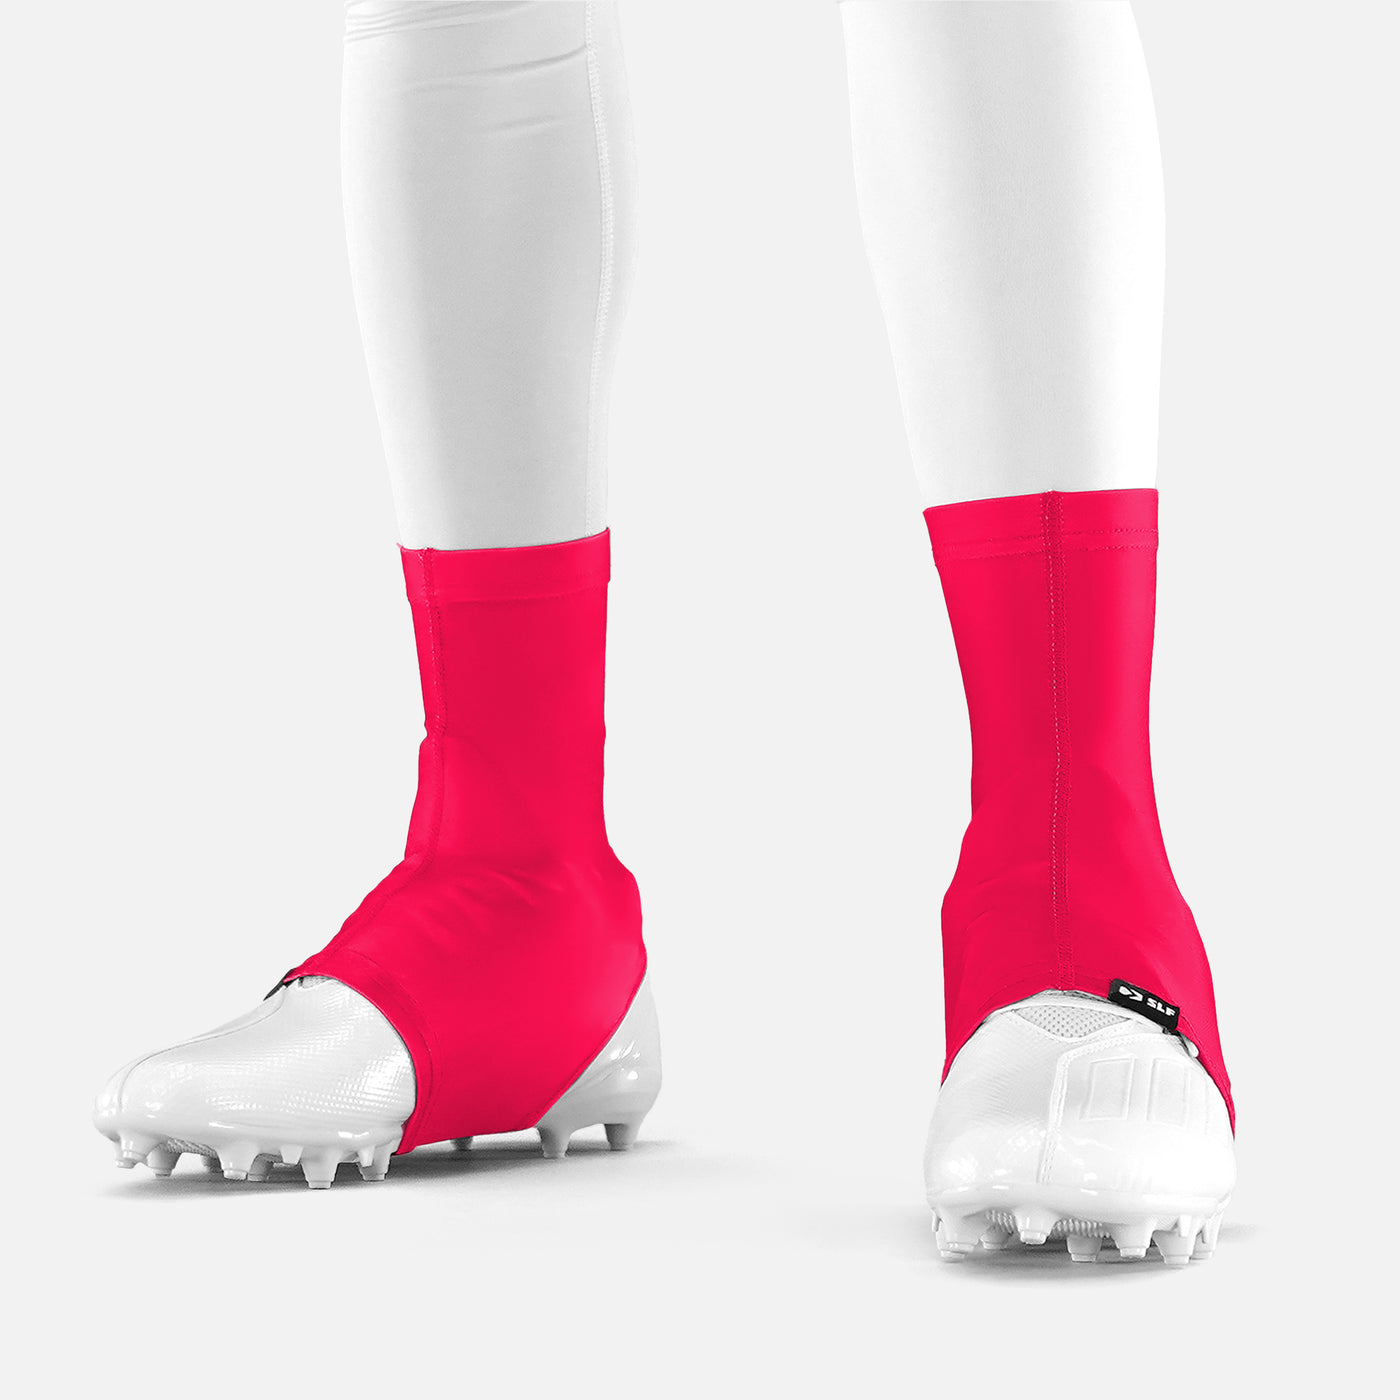 Hue Pink Spats / Cleat Covers